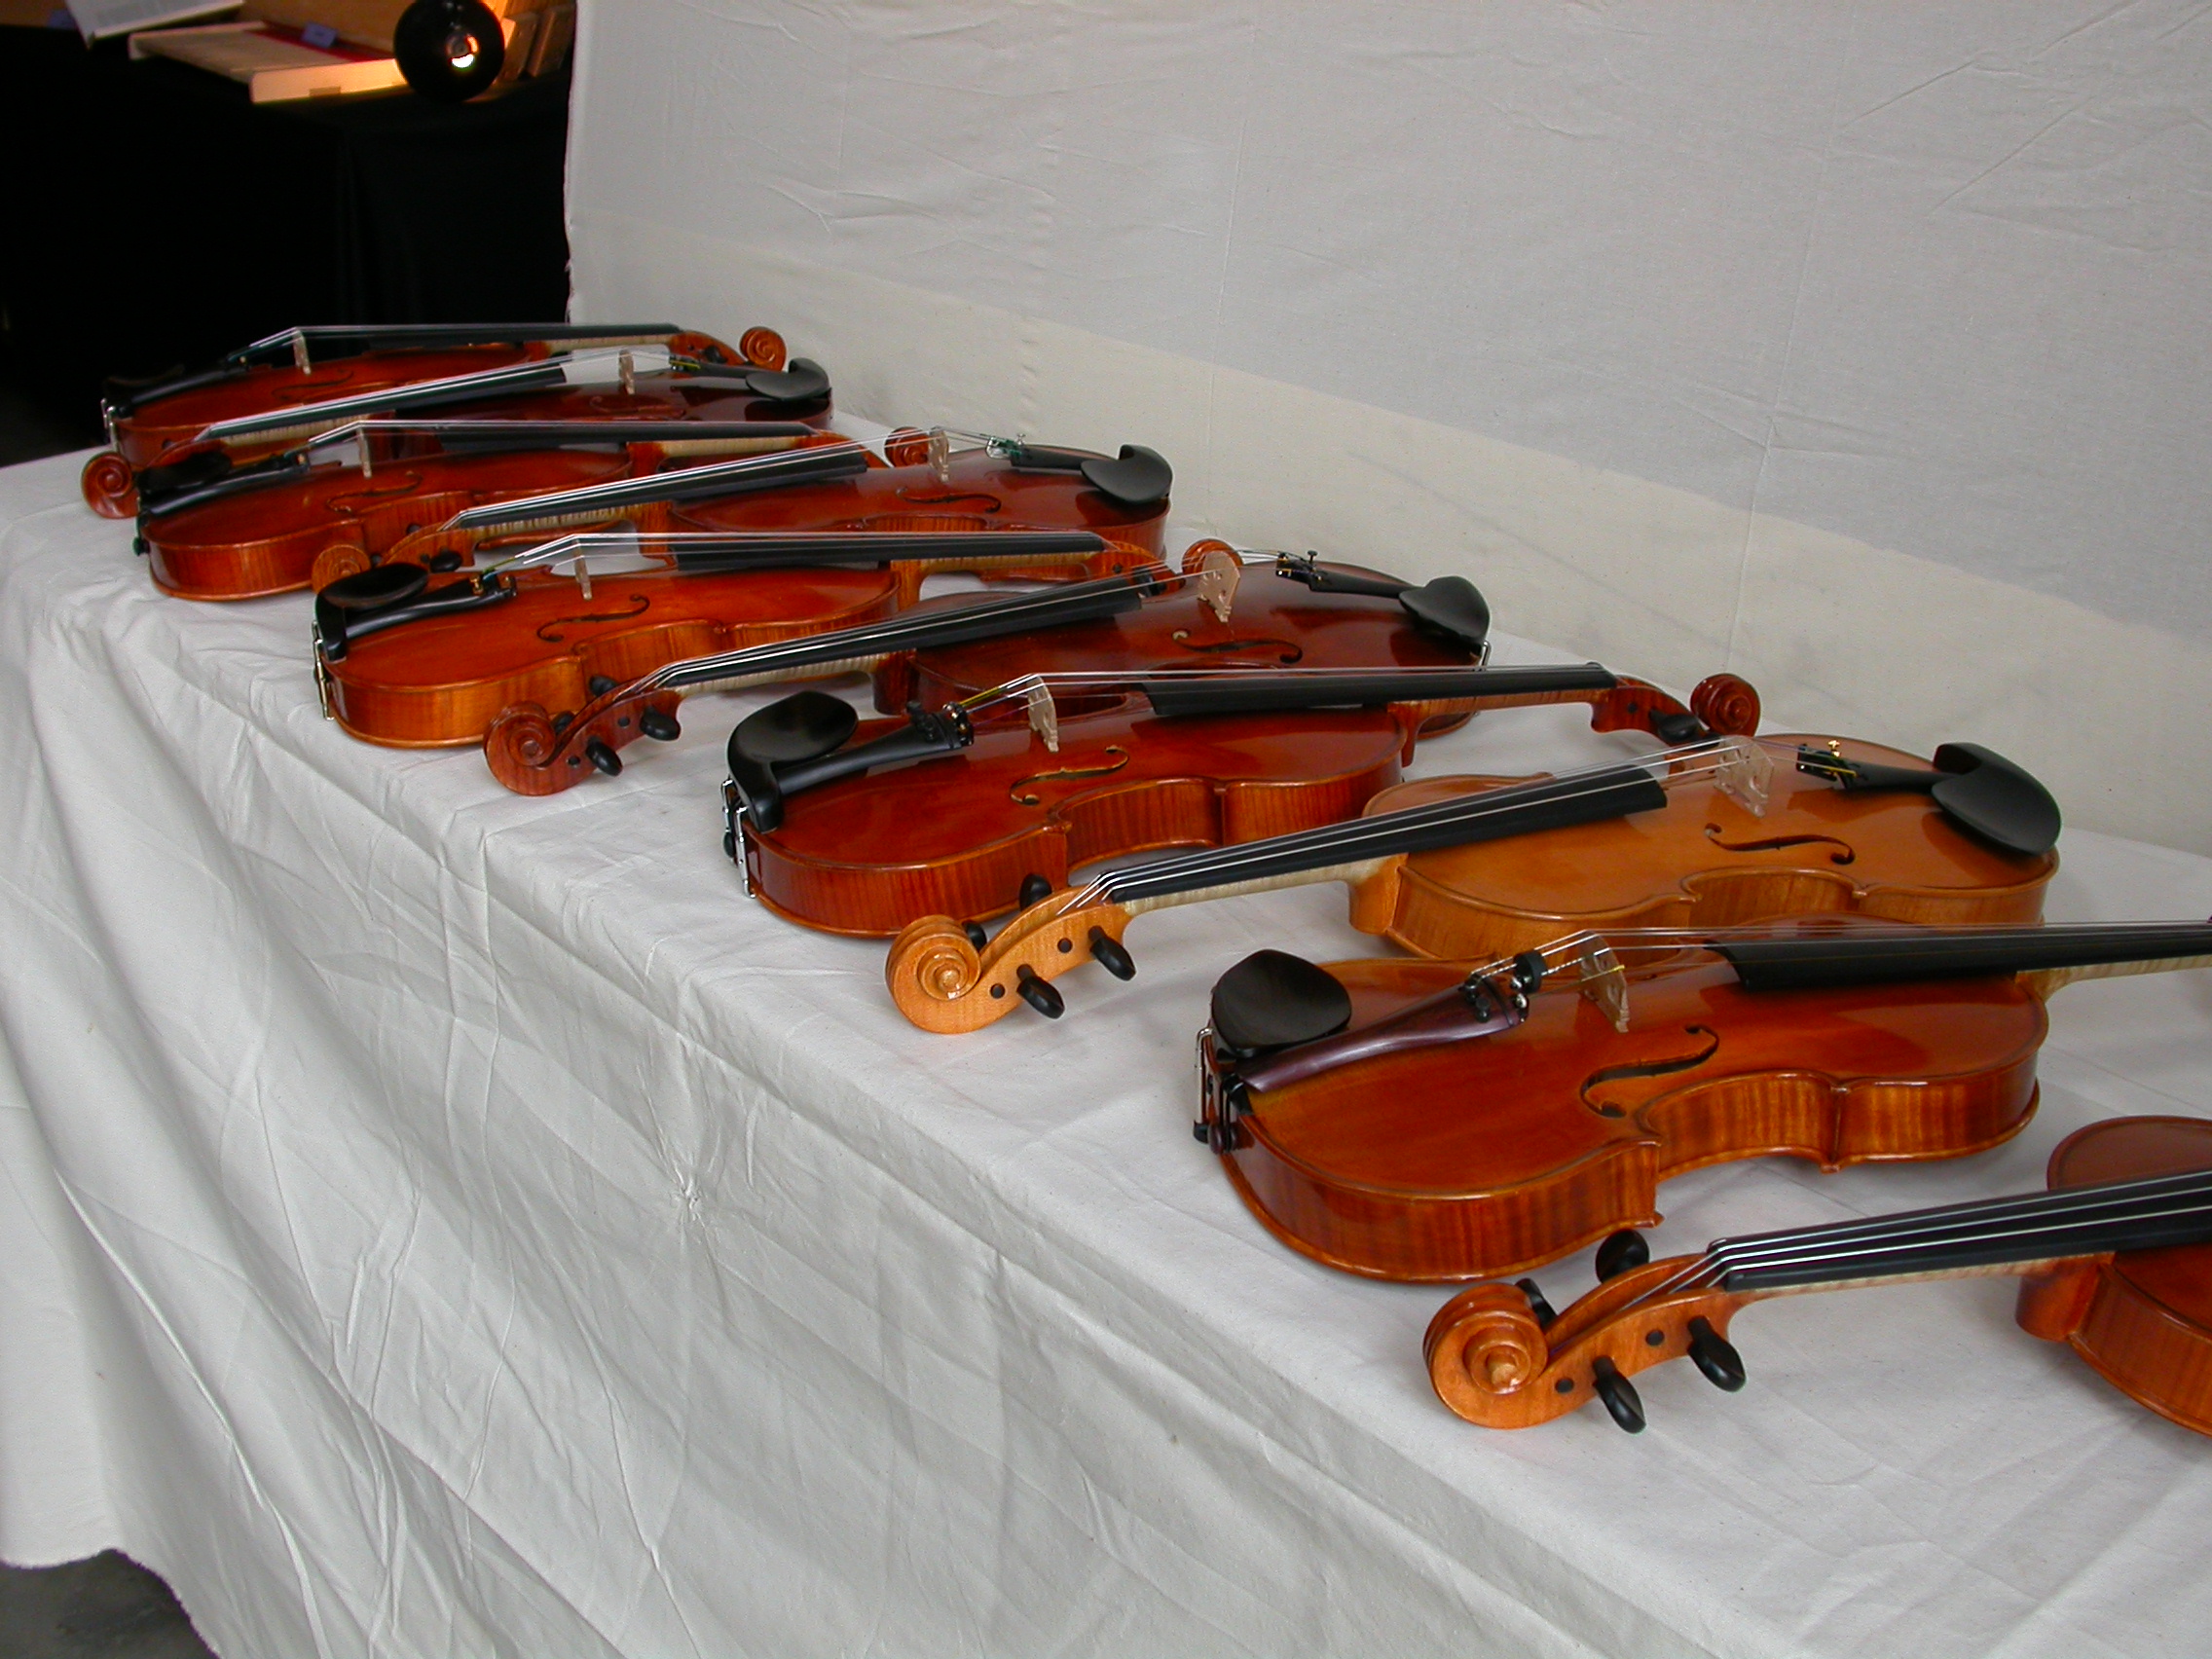 paul objects instruments violin violins string music musical